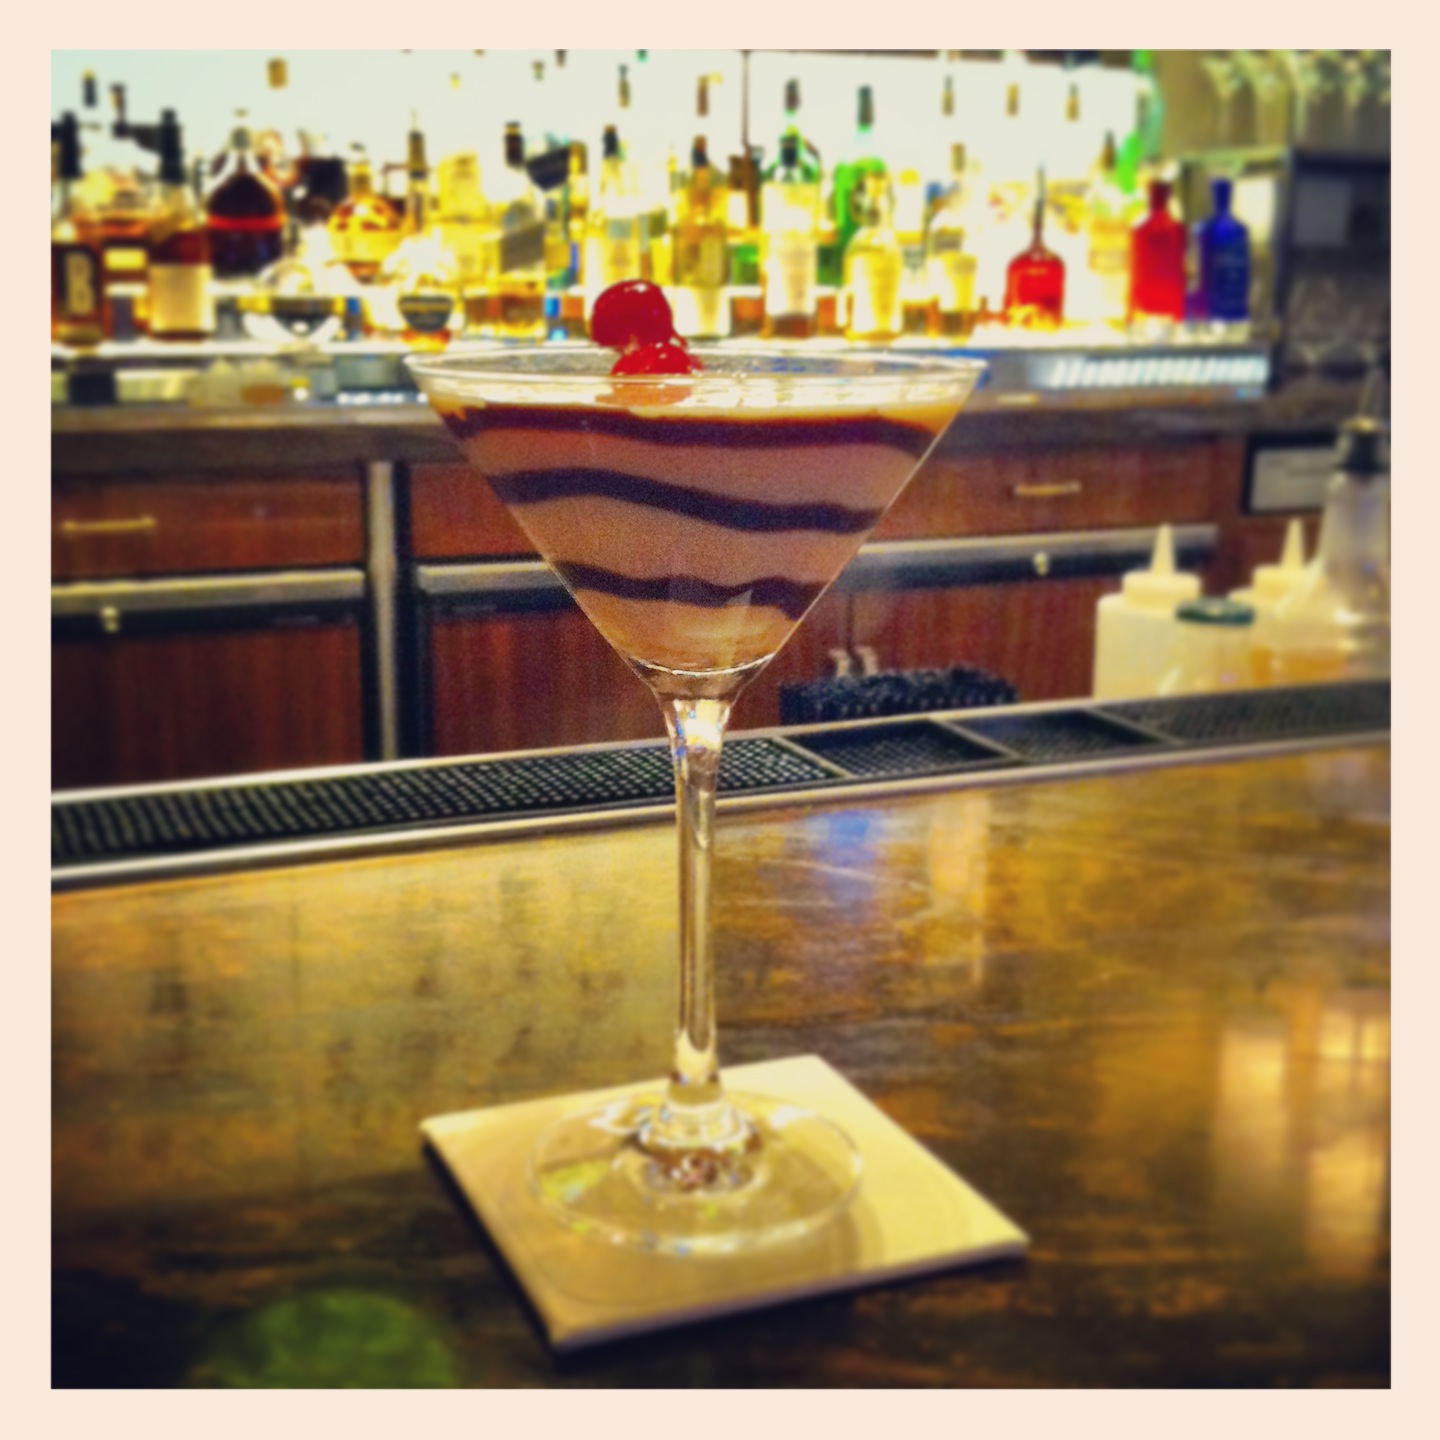 Day 12: A Celebration of Chocolate – Chocolate Covered Cherry Martini at HMF